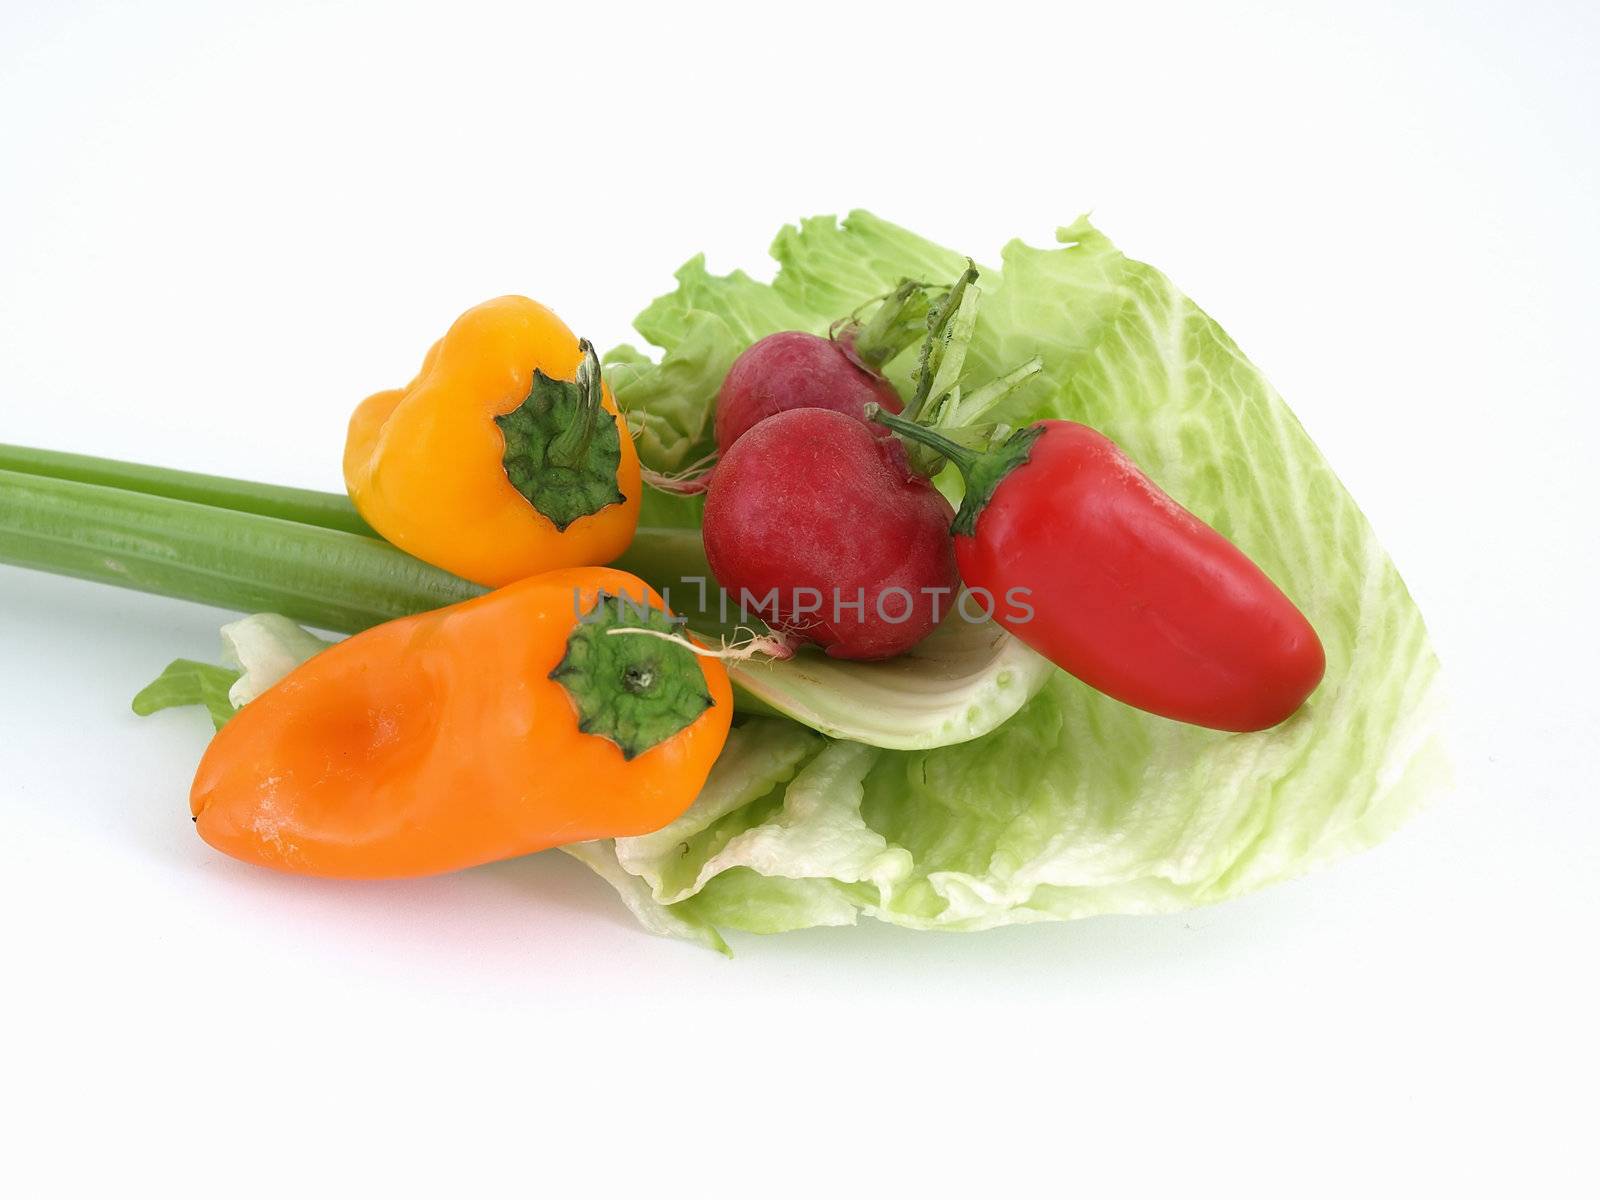 Colorful peppers and greens isolated over a white background.